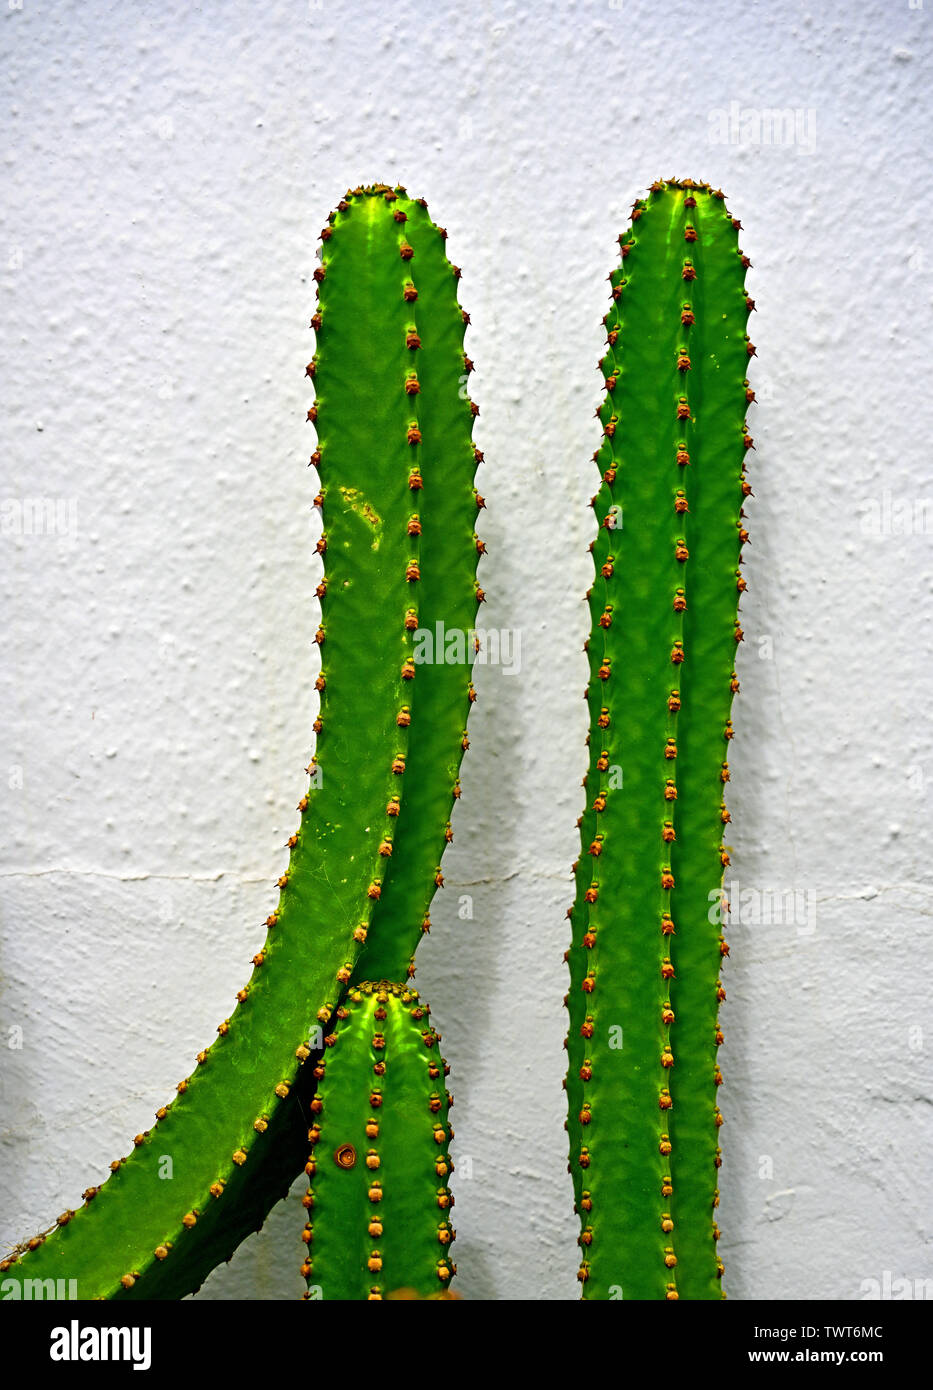 Three green saguaro type spiny cactus against a white wall background Stock Photo